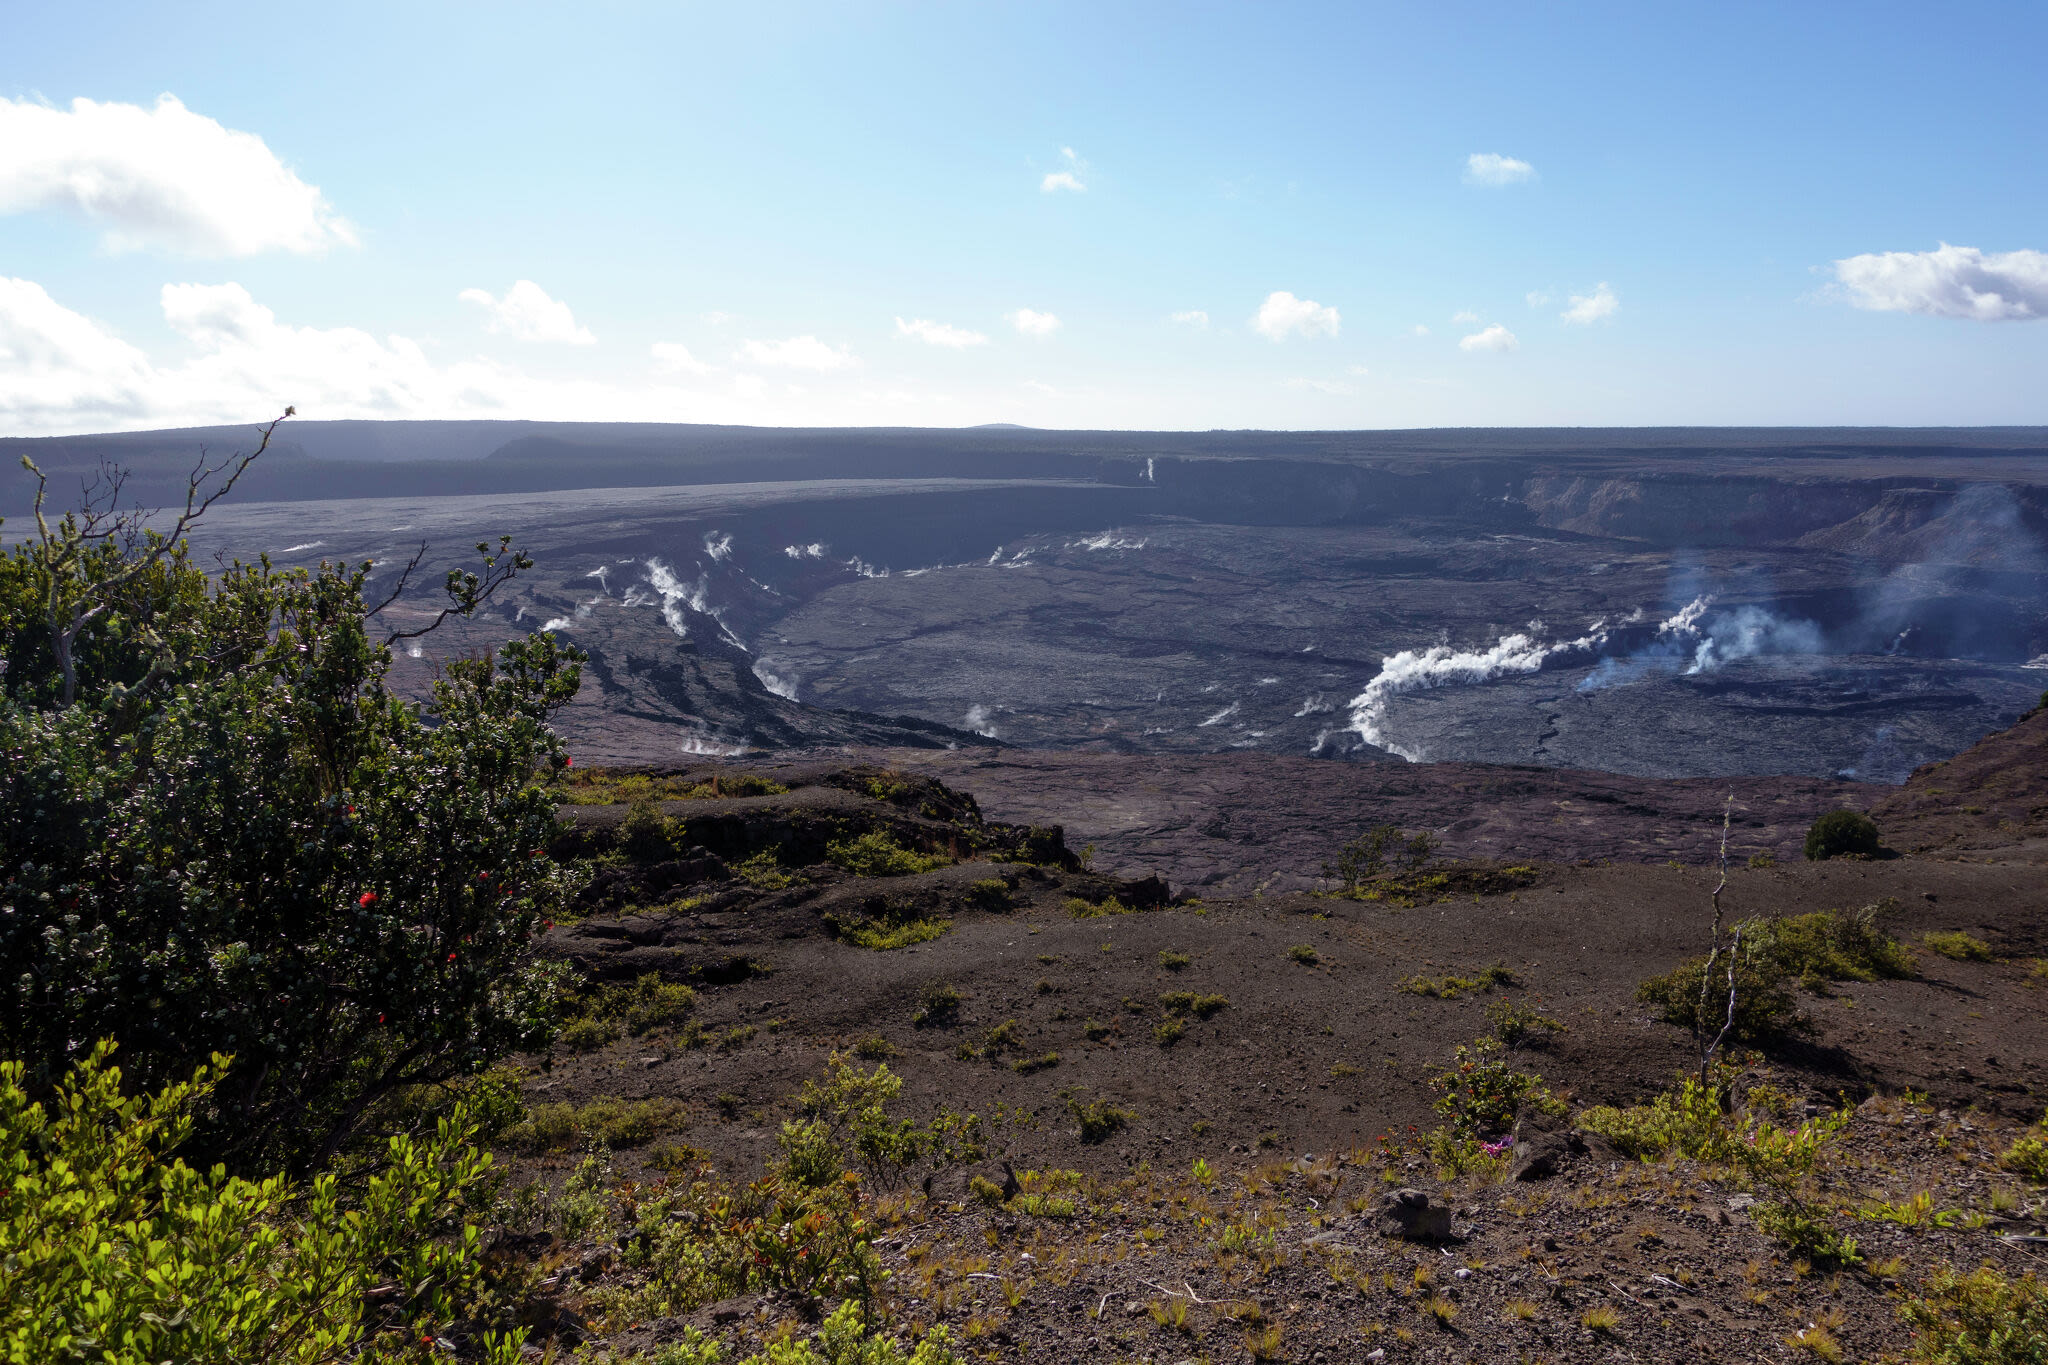 Hawaii's Kilauea volcano rattled by 1,600 earthquakes in 6 days